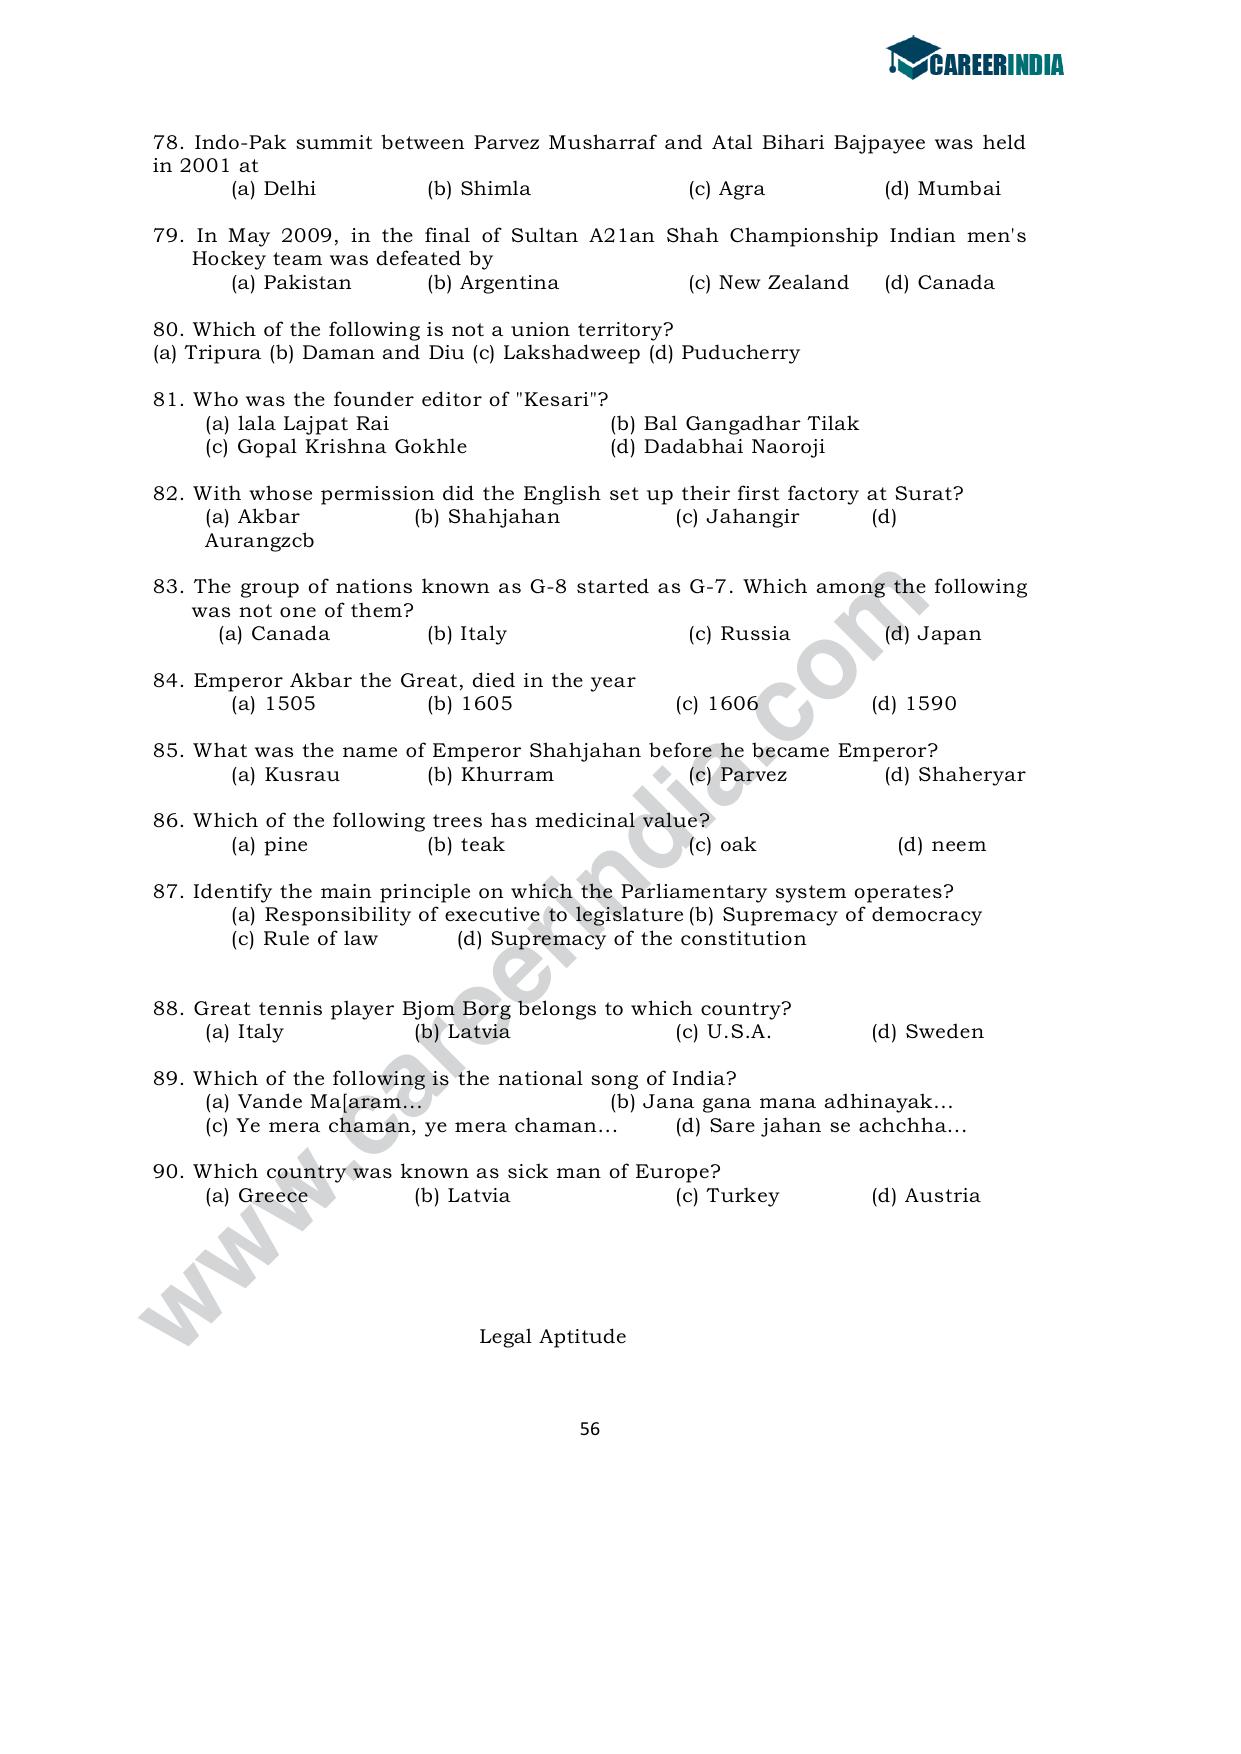 CLAT 2010 UG Sample Question Paper - Page 9